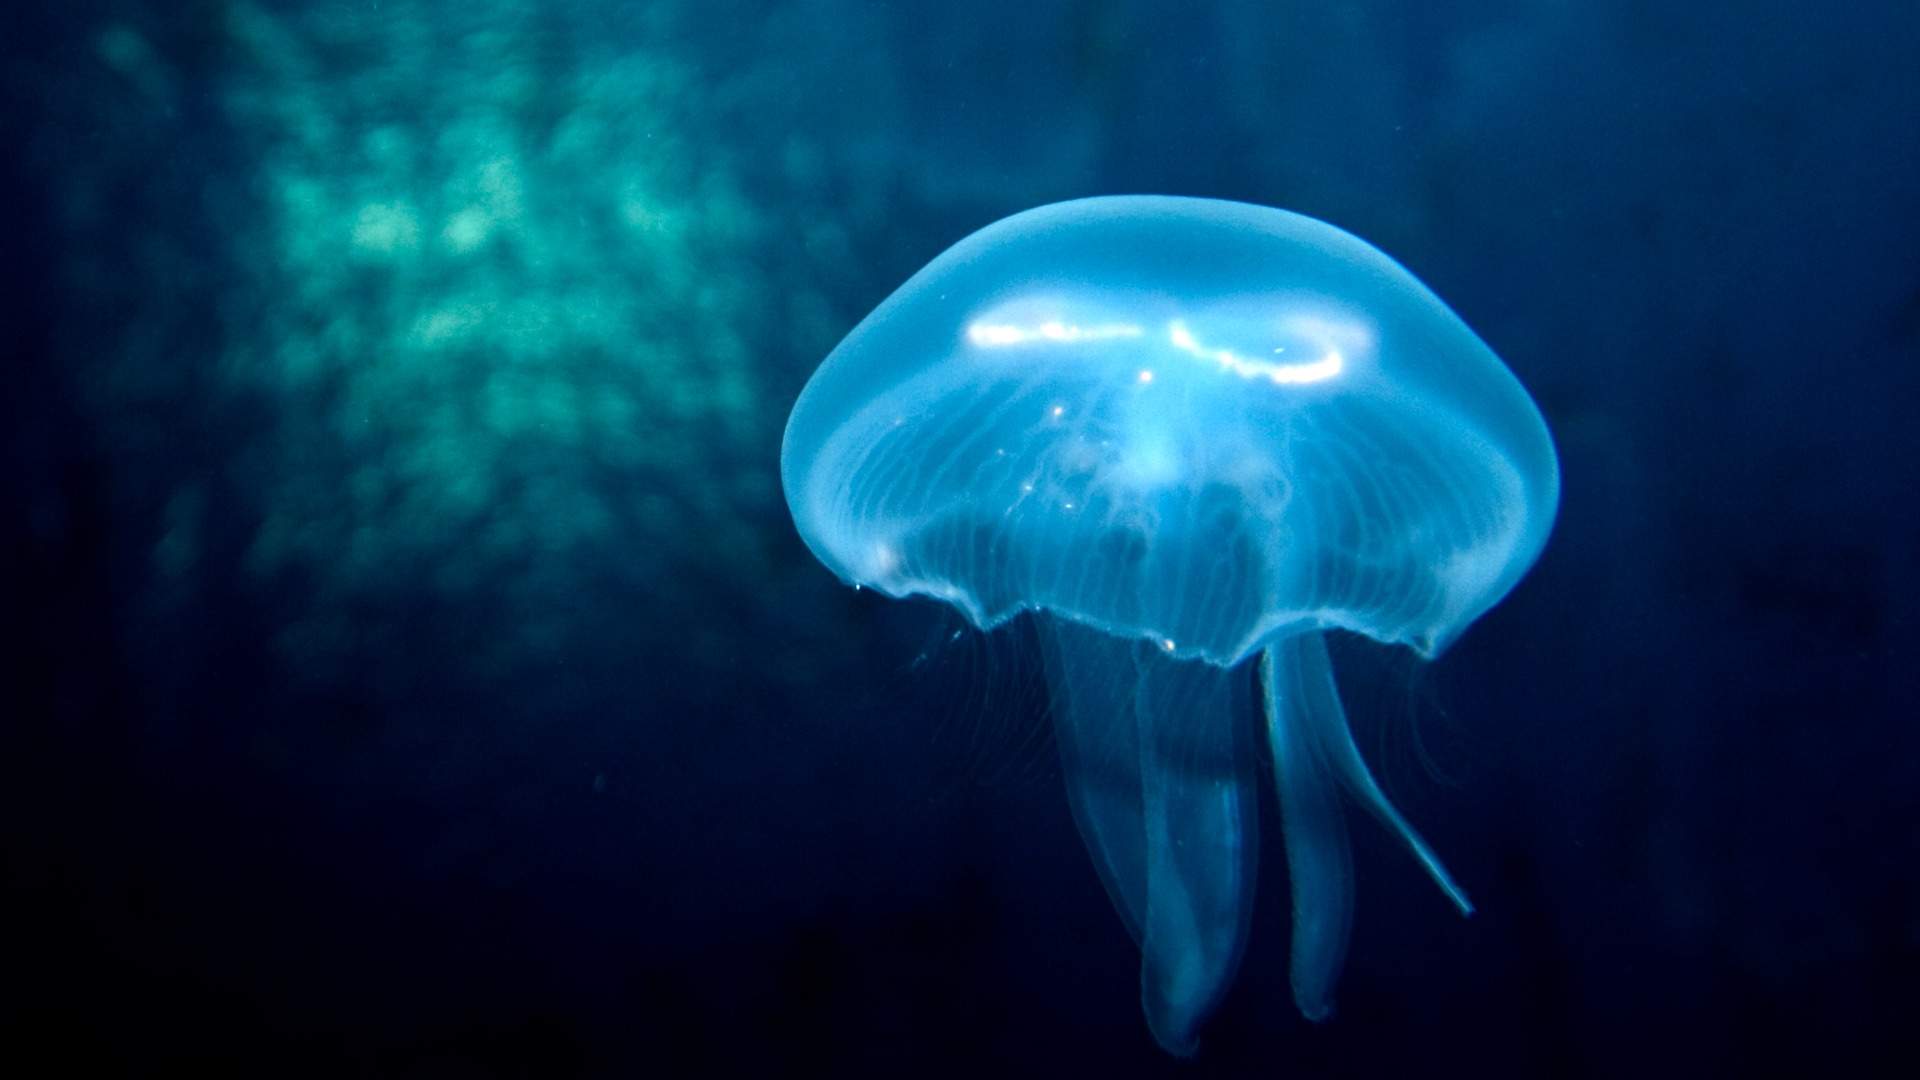 Ocean Invaders Is the Interactive and Luminous New Jellyfish Exhibition Floating Into Melbourne Aquarium